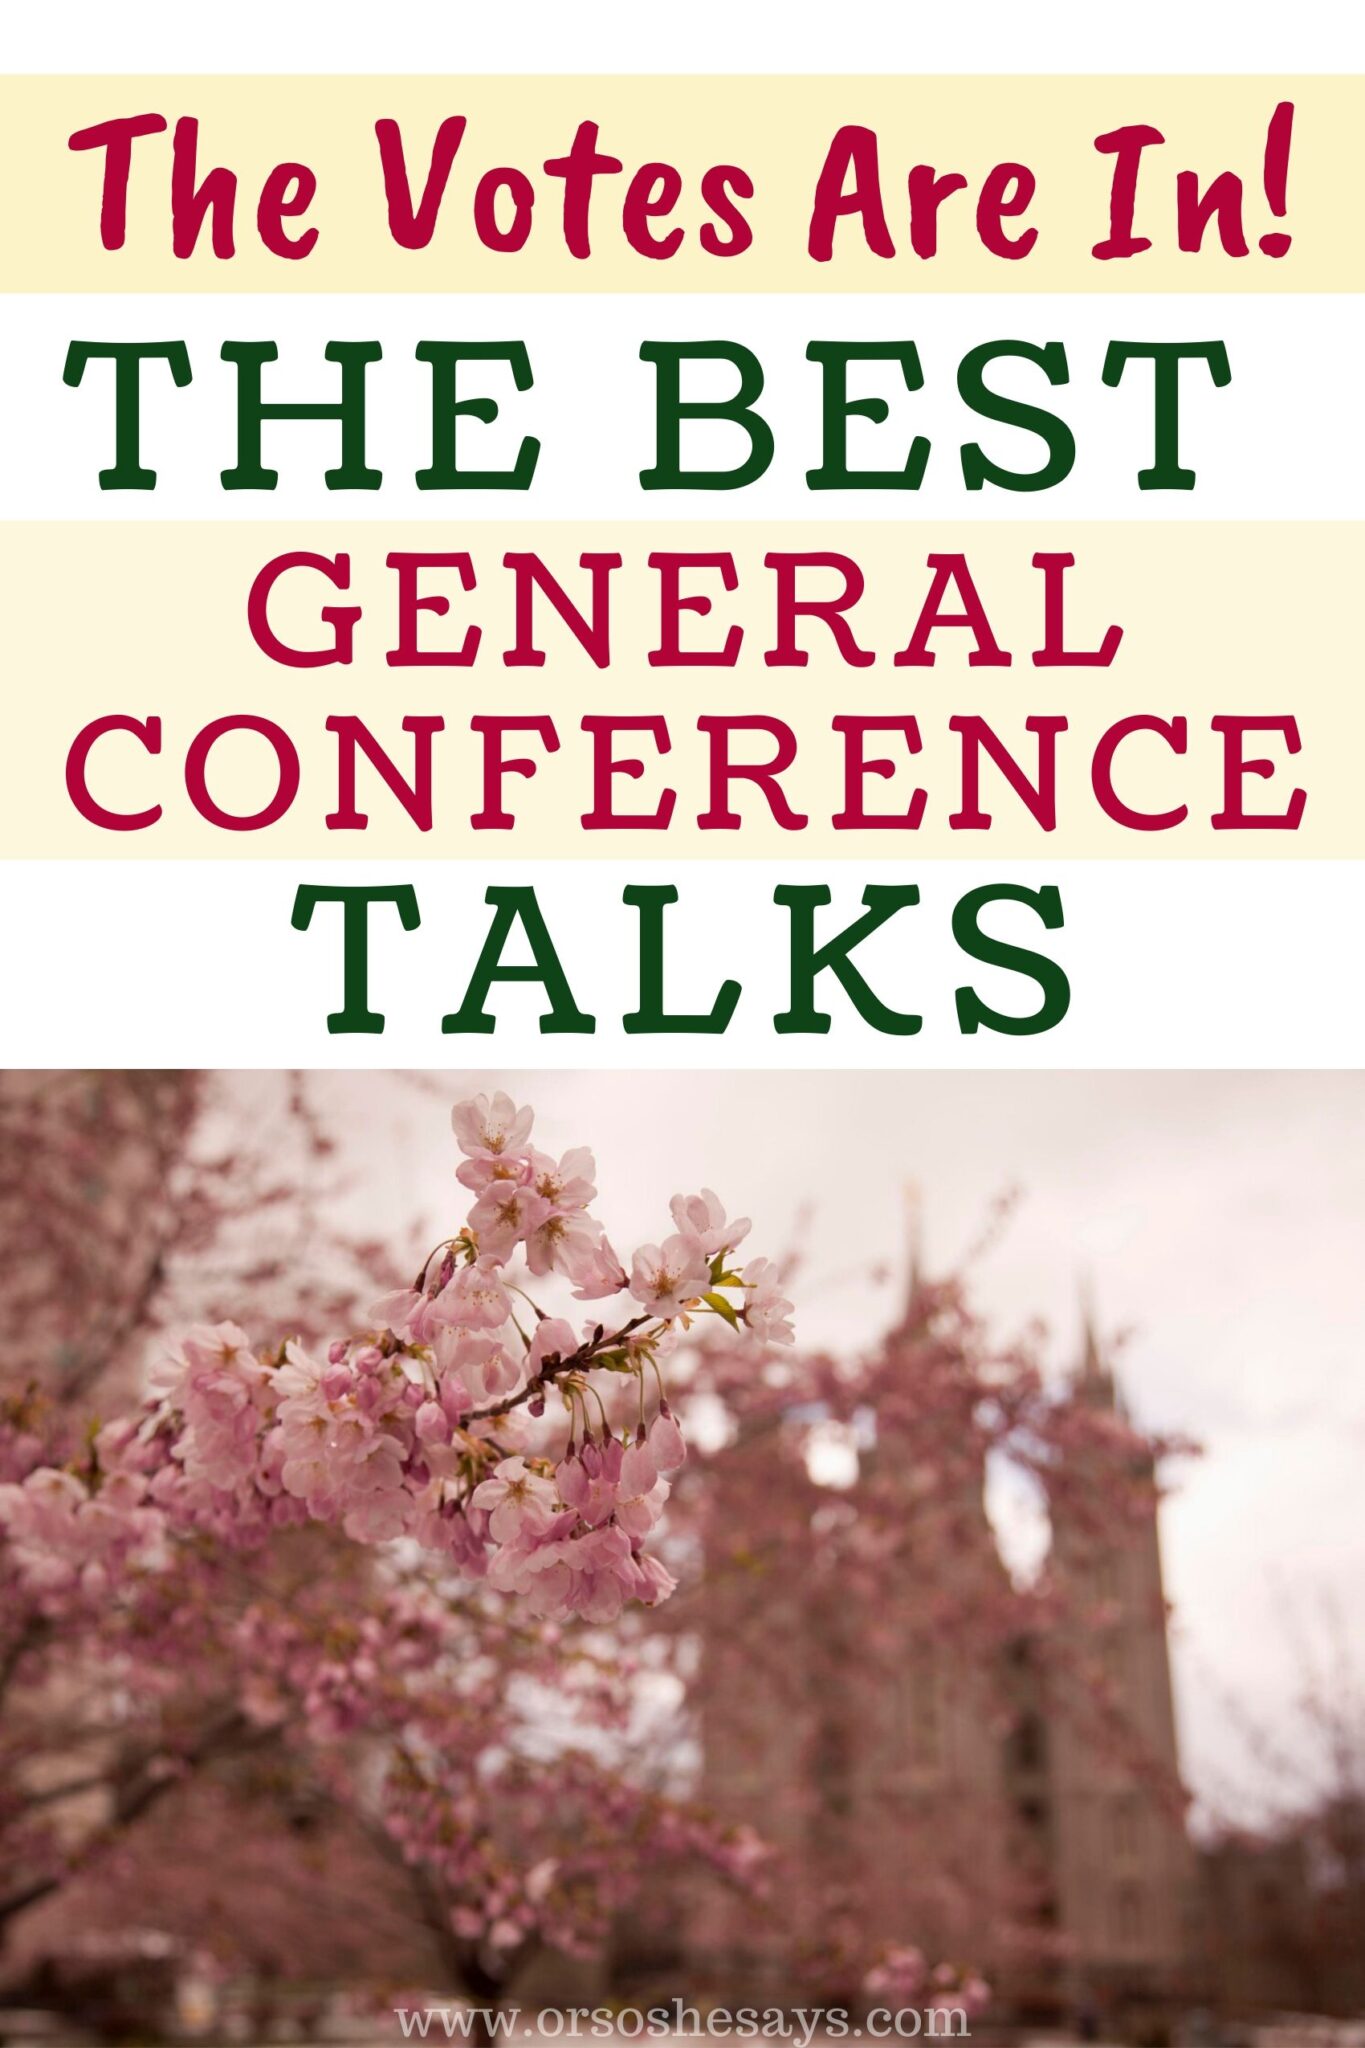 24 of the BEST General Conference Talks of All Time Voted by Readers!